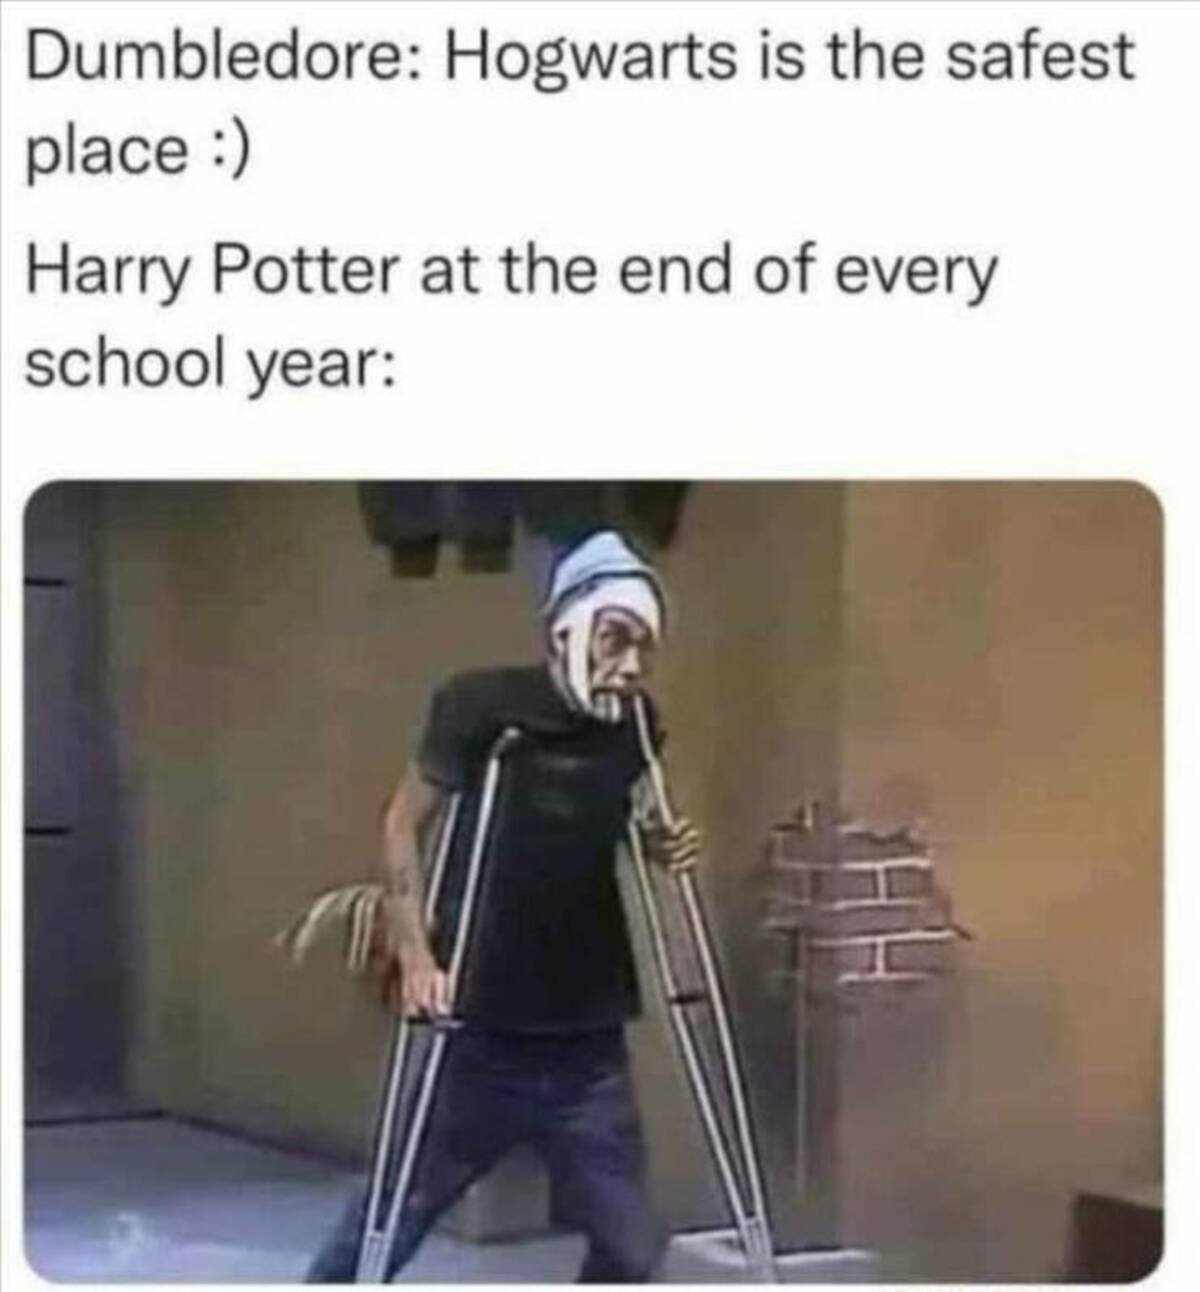 hogwarts meme - Dumbledore Hogwarts is the safest place Harry Potter at the end of every school year